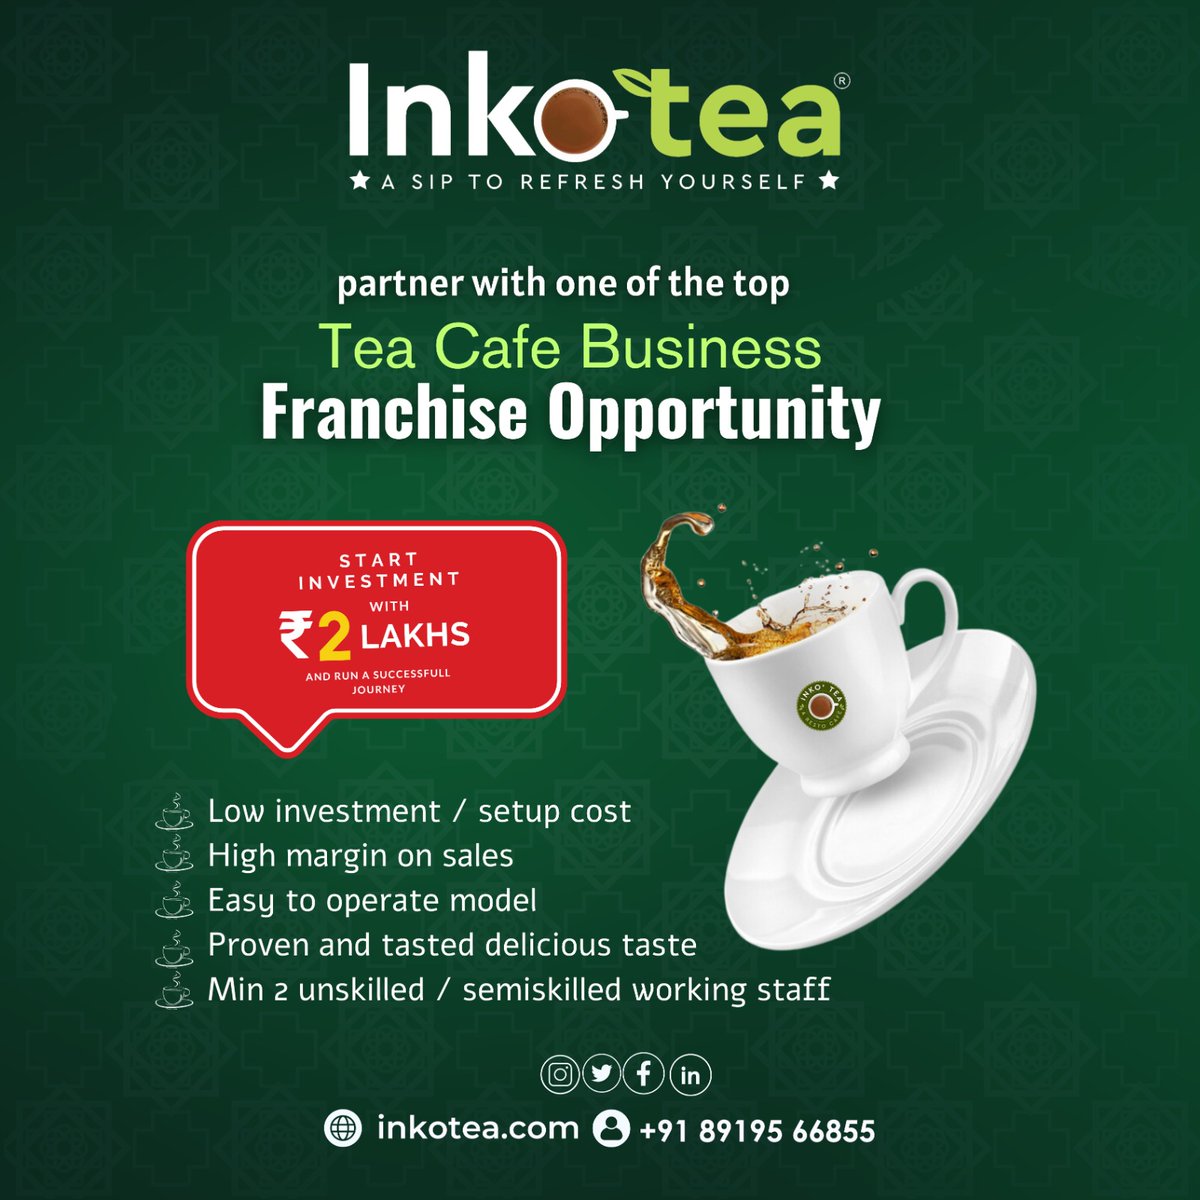 Partner with one of the top Tea Cafe Business Franchise Opportunities and start your investment journey with just 2 lakhs.
Why choose Inkotea?
• Low investment
• High margins on sales
• Easy-to-operate model
#Inkotea  #BusinessFranchise  #franchisebusiness  #teafranchise